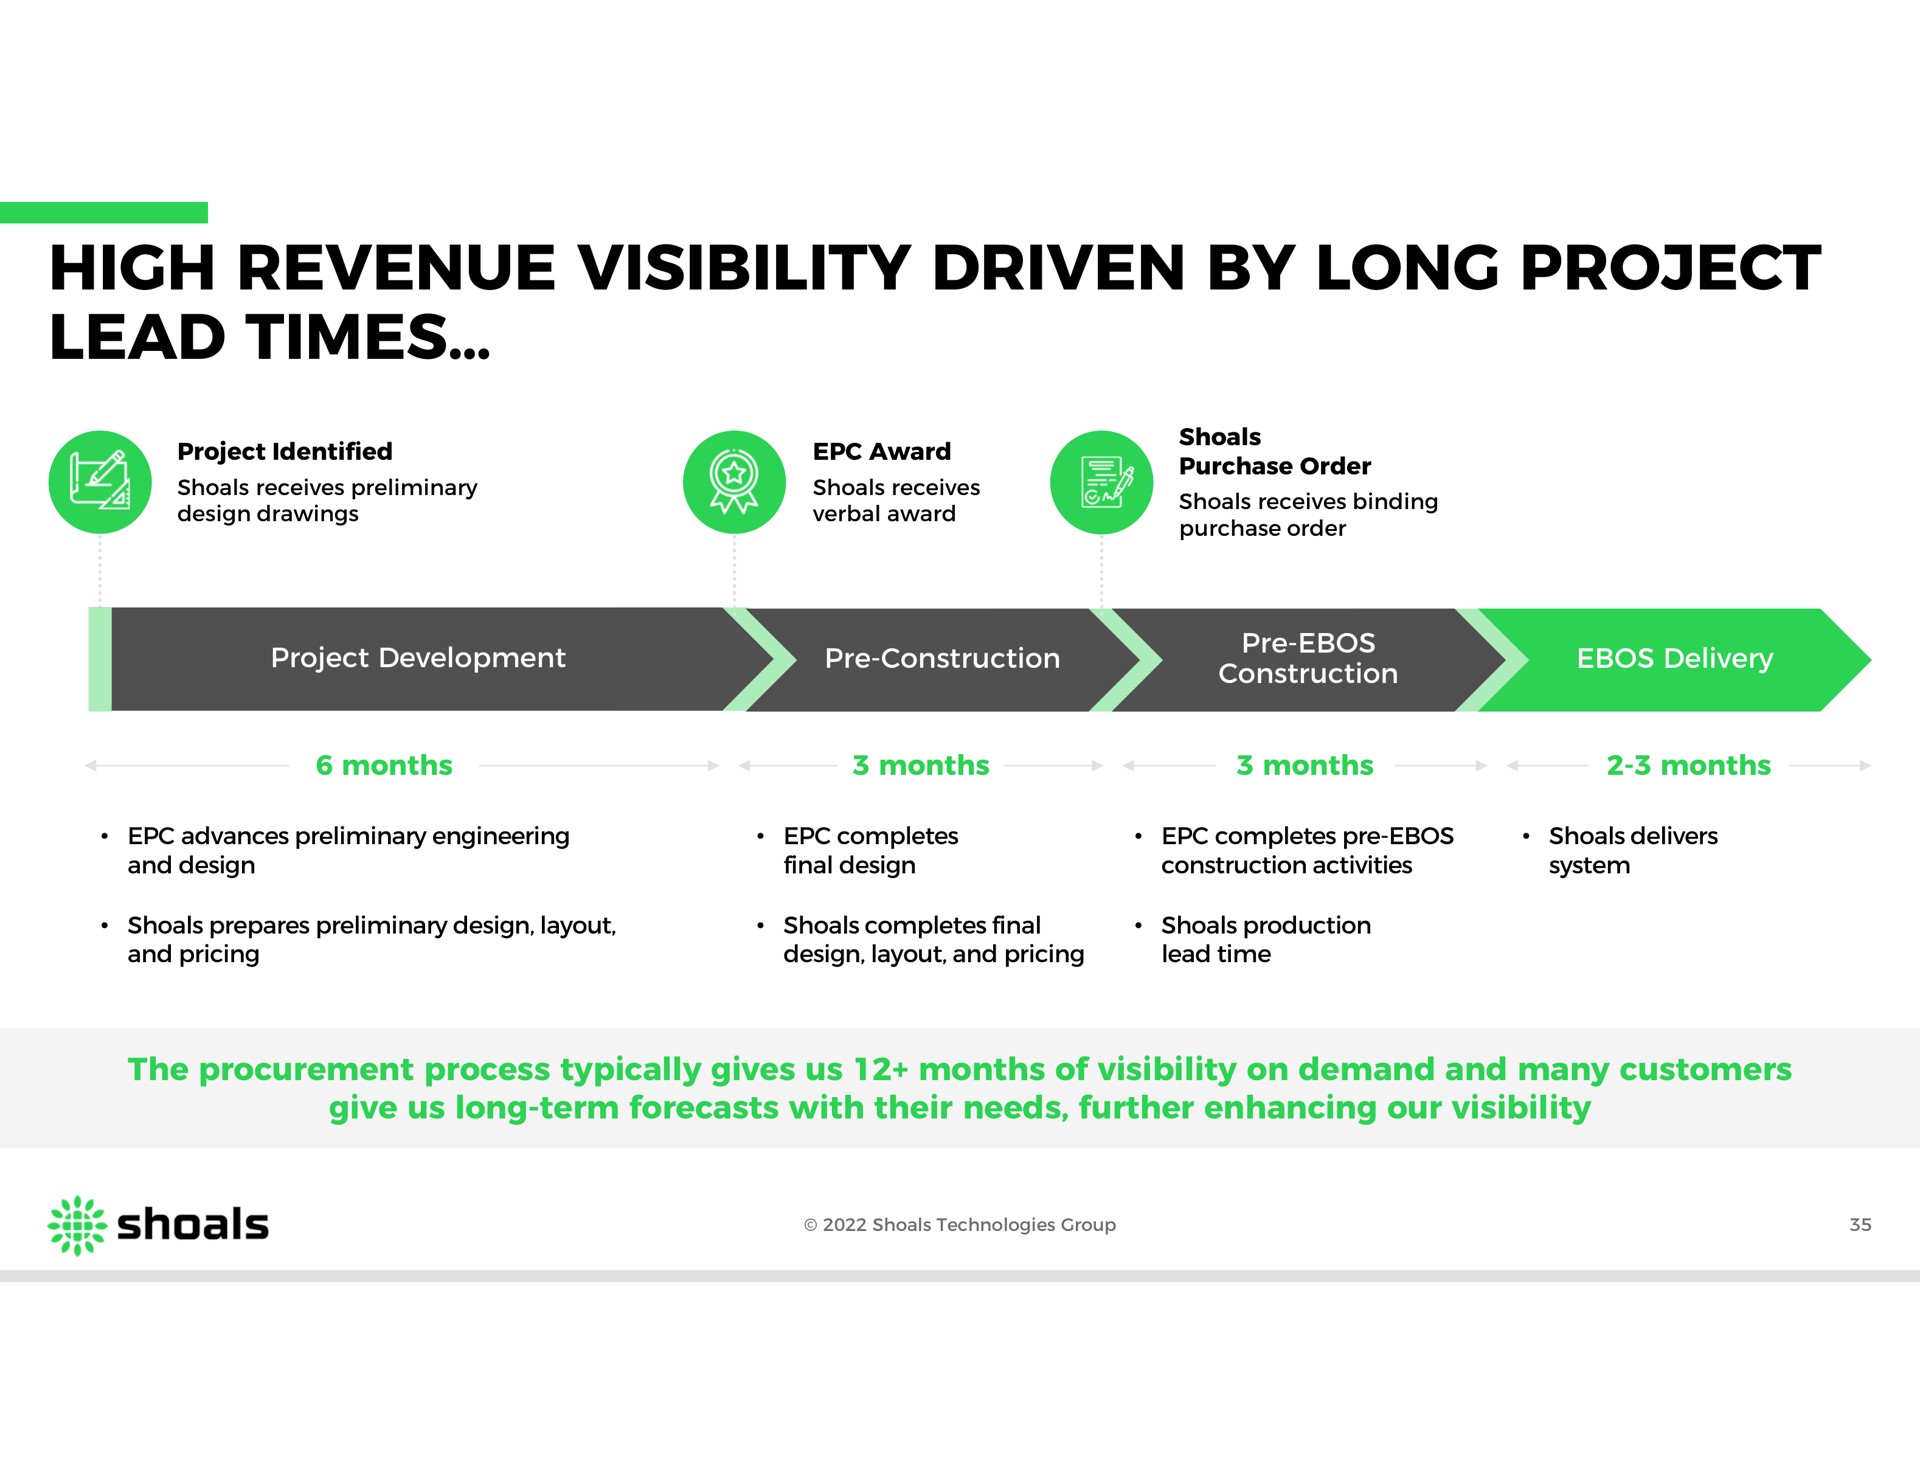 high revenue visibility driven by long project lead times | Shoals